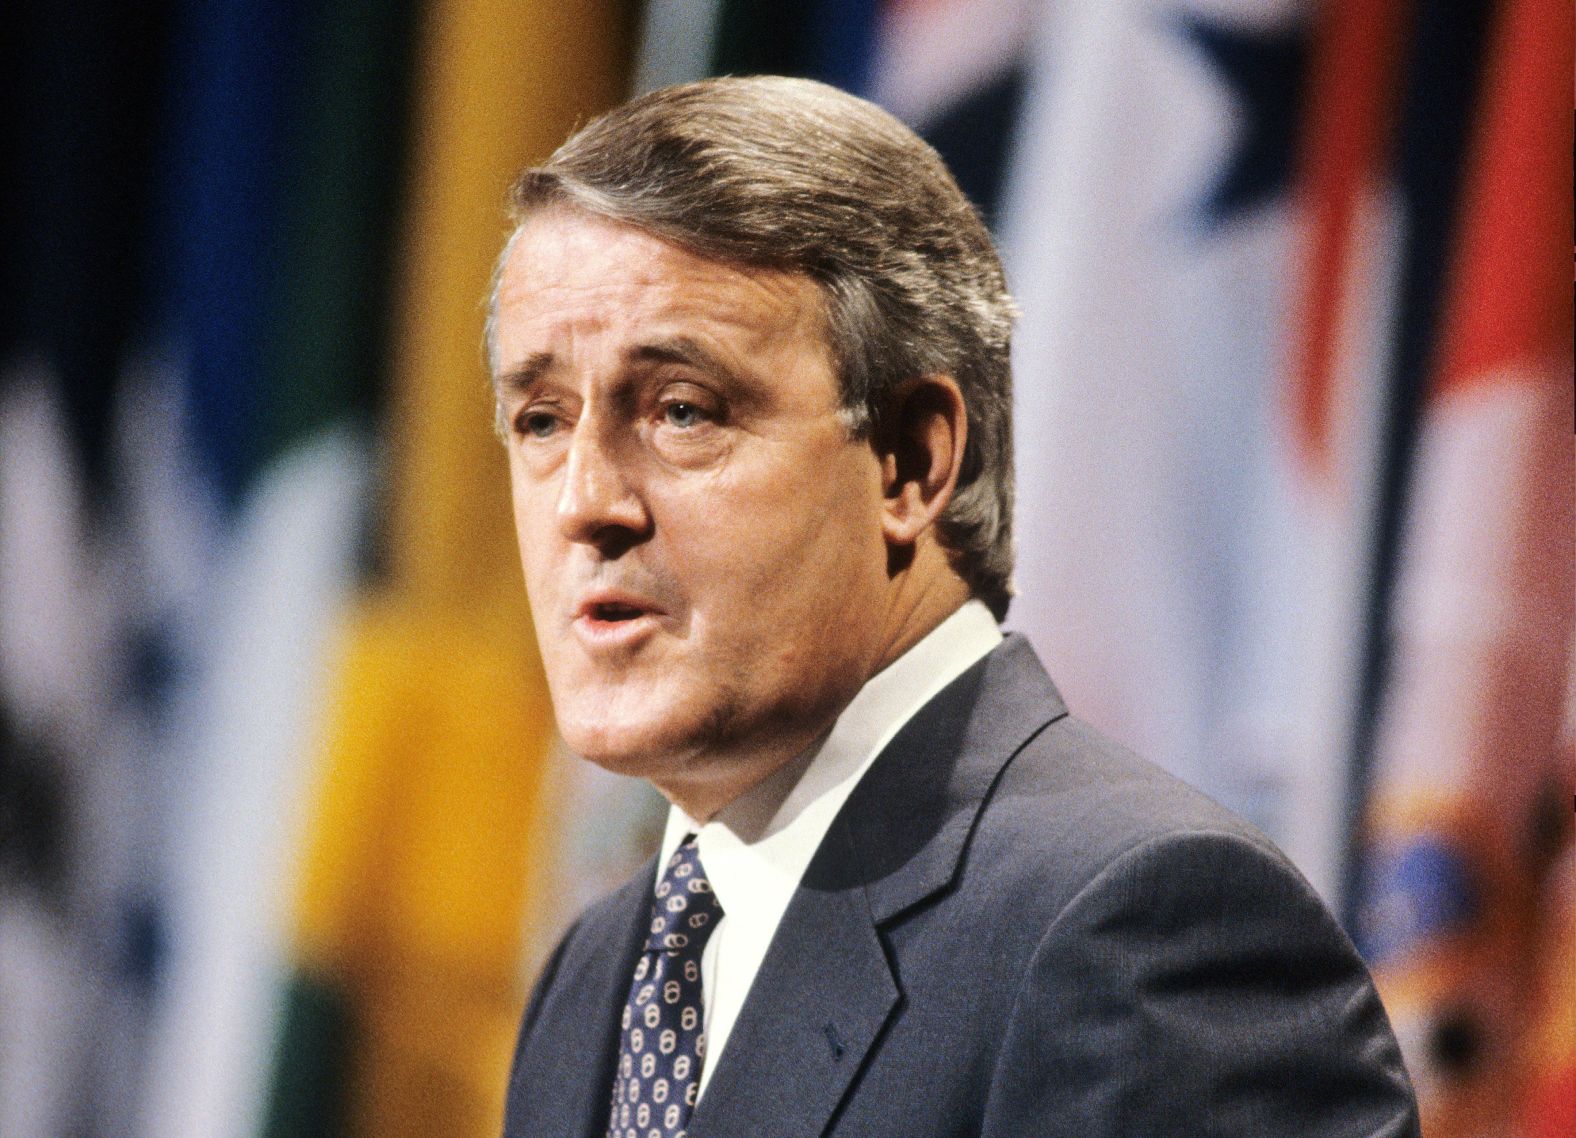 Former Canadian Prime Minister <a href="index.php?page=&url=https%3A%2F%2Fwww.cnn.com%2F2024%2F02%2F29%2Famericas%2Fbrian-mulroney-obit%2Findex.html" target="_blank">Brian Mulroney</a> died at the age of 84, according to Canadian media reports citing his daughter's social media post on February 29.